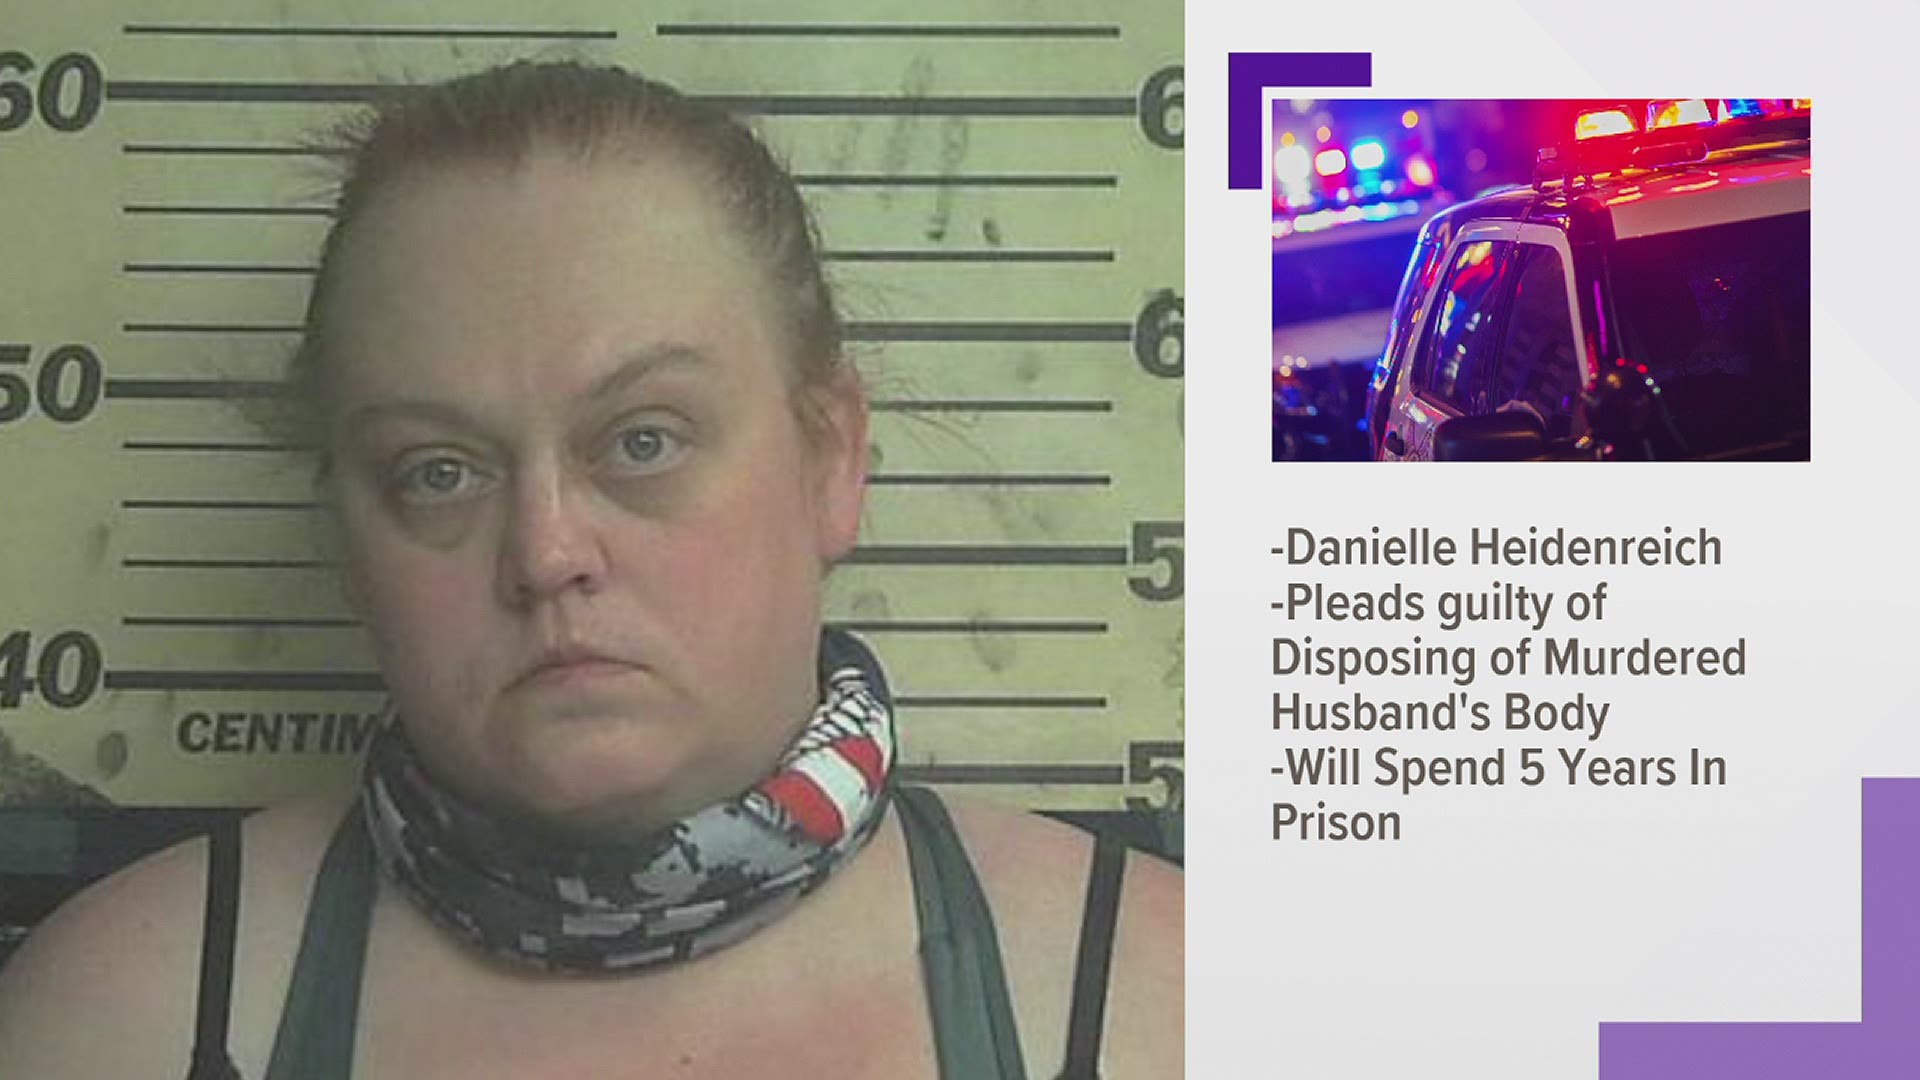 She was sentenced to serve up to five years in prison.